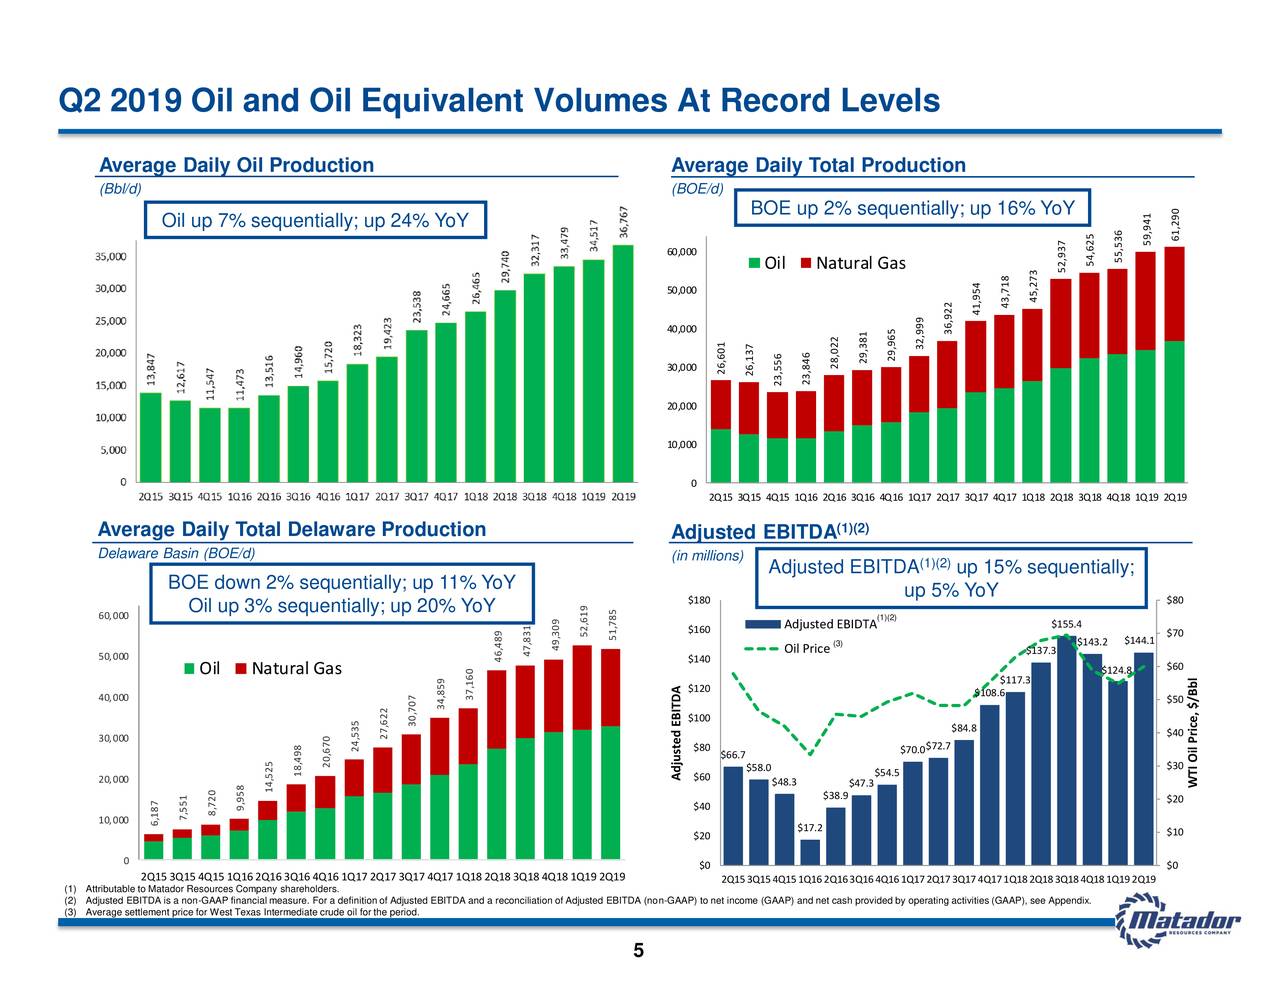 Q2 2019 Oil and Oil Equivalent Volumes At Record Levels